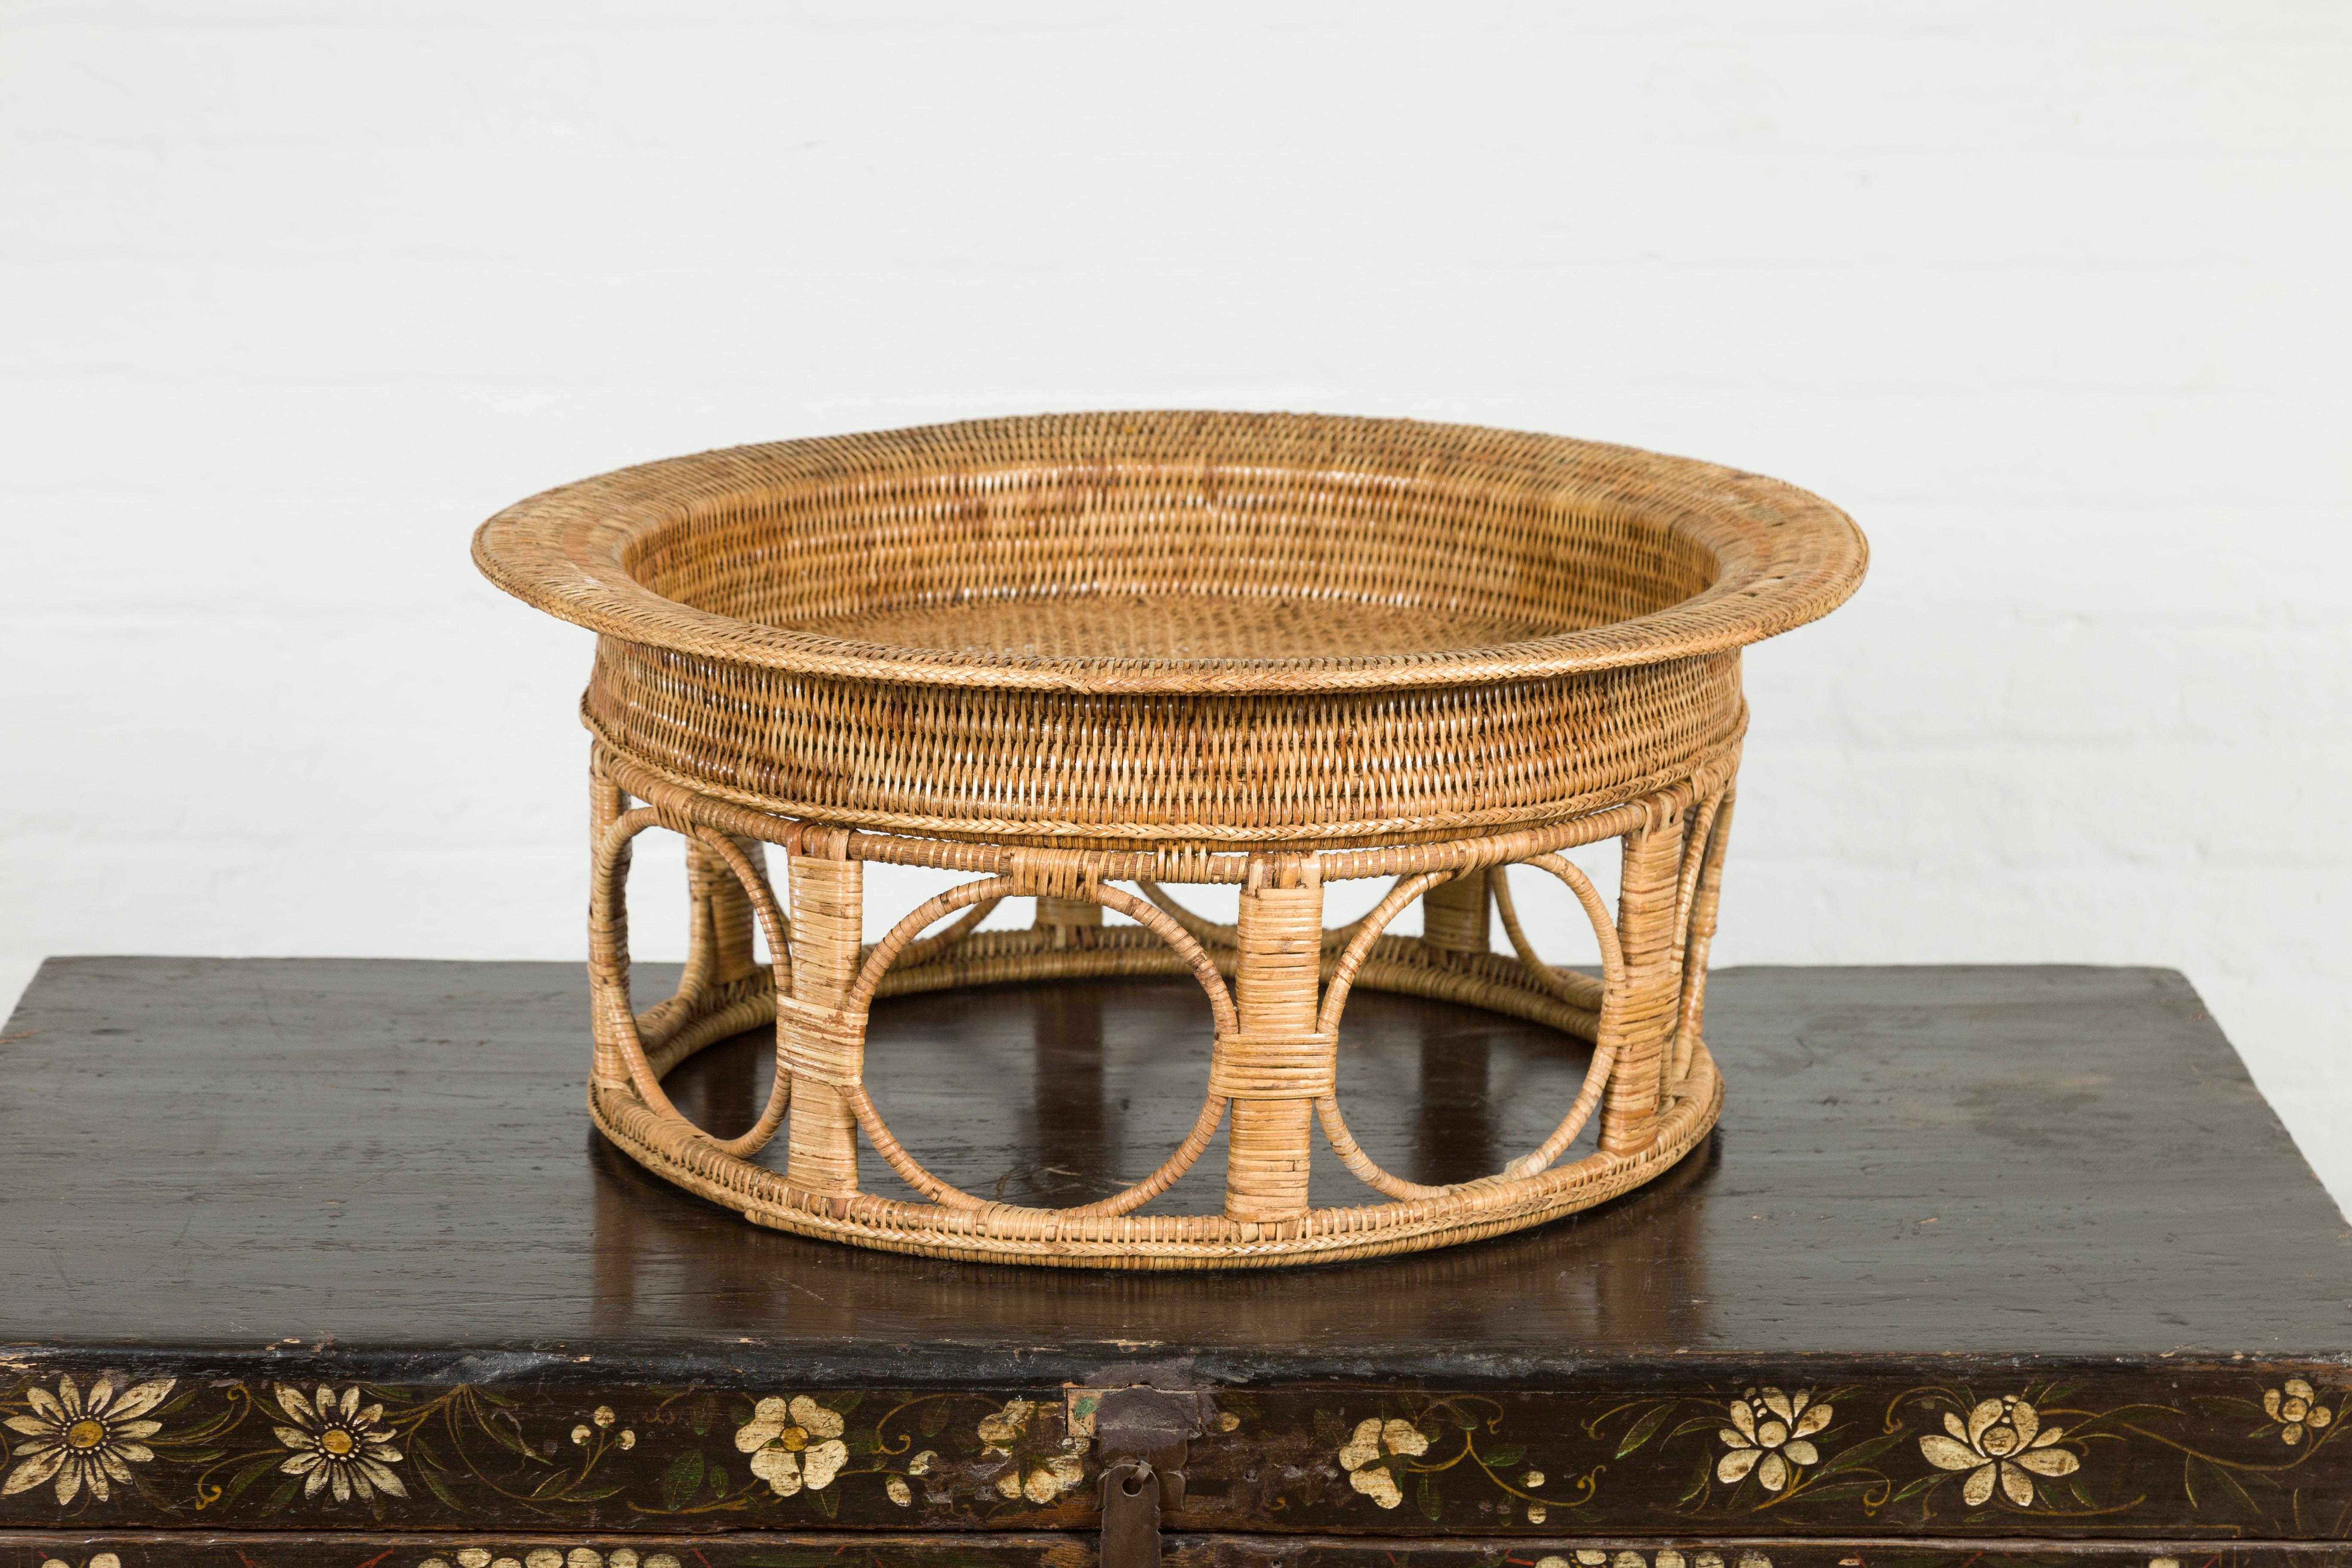 A vintage Thai Country style woven rattan Khantok pedestal fruit tray from the mid 20th century with circular shape and pierced ring motifs. Created in Northern Thailand by the Lanna people, this pedestal tray features a circular tray top sitting